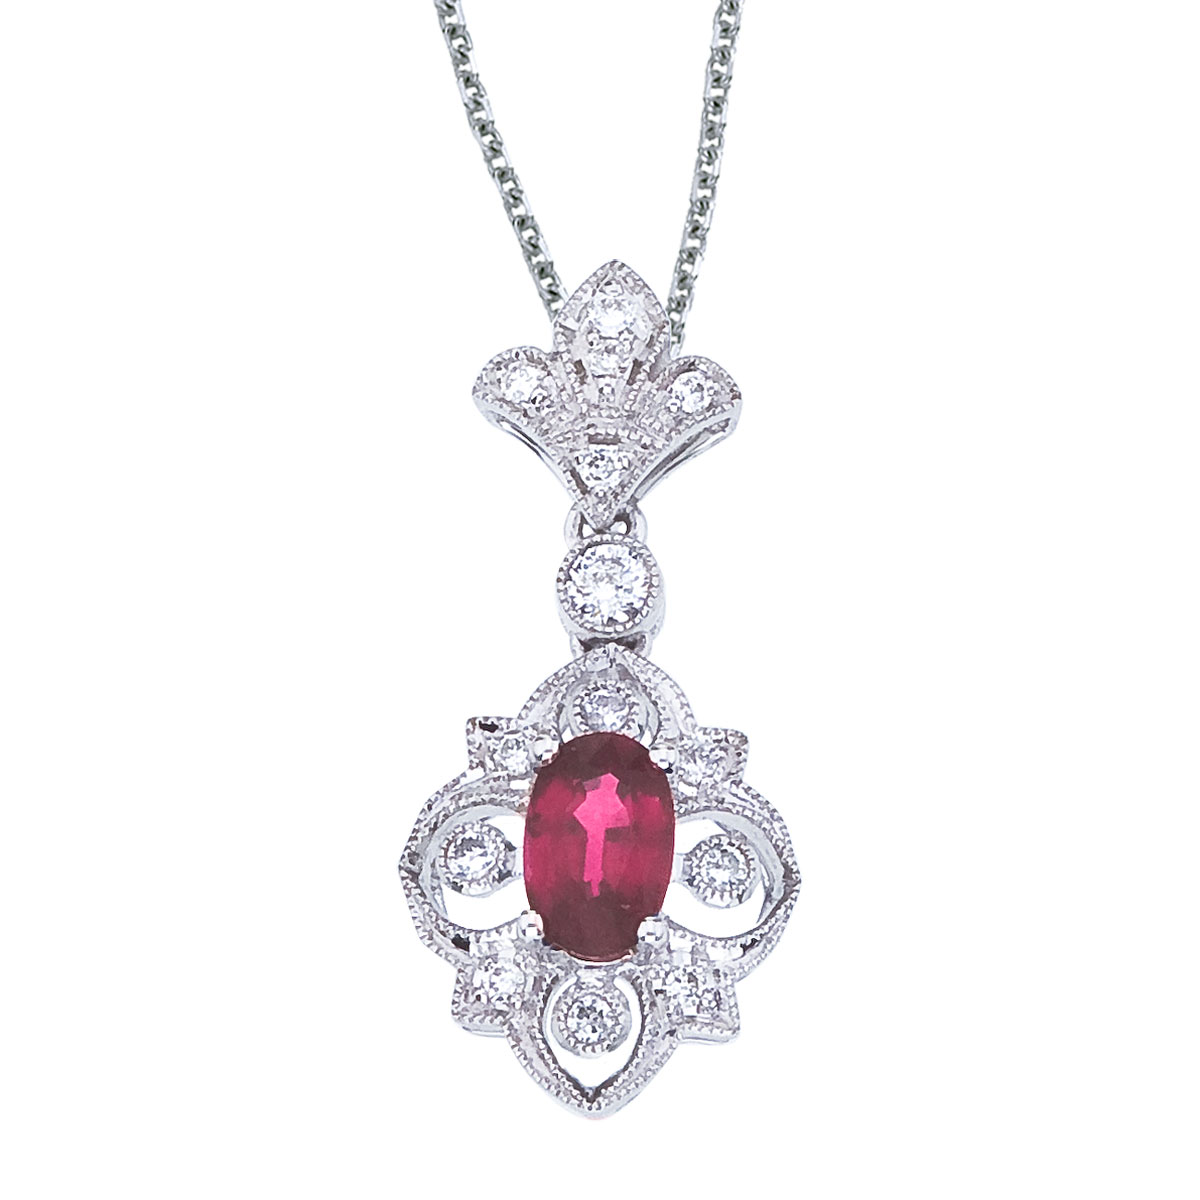 This stunning pendant features a 5x3 mm ruby and .10 total diamond carats set in a 14k white gold...